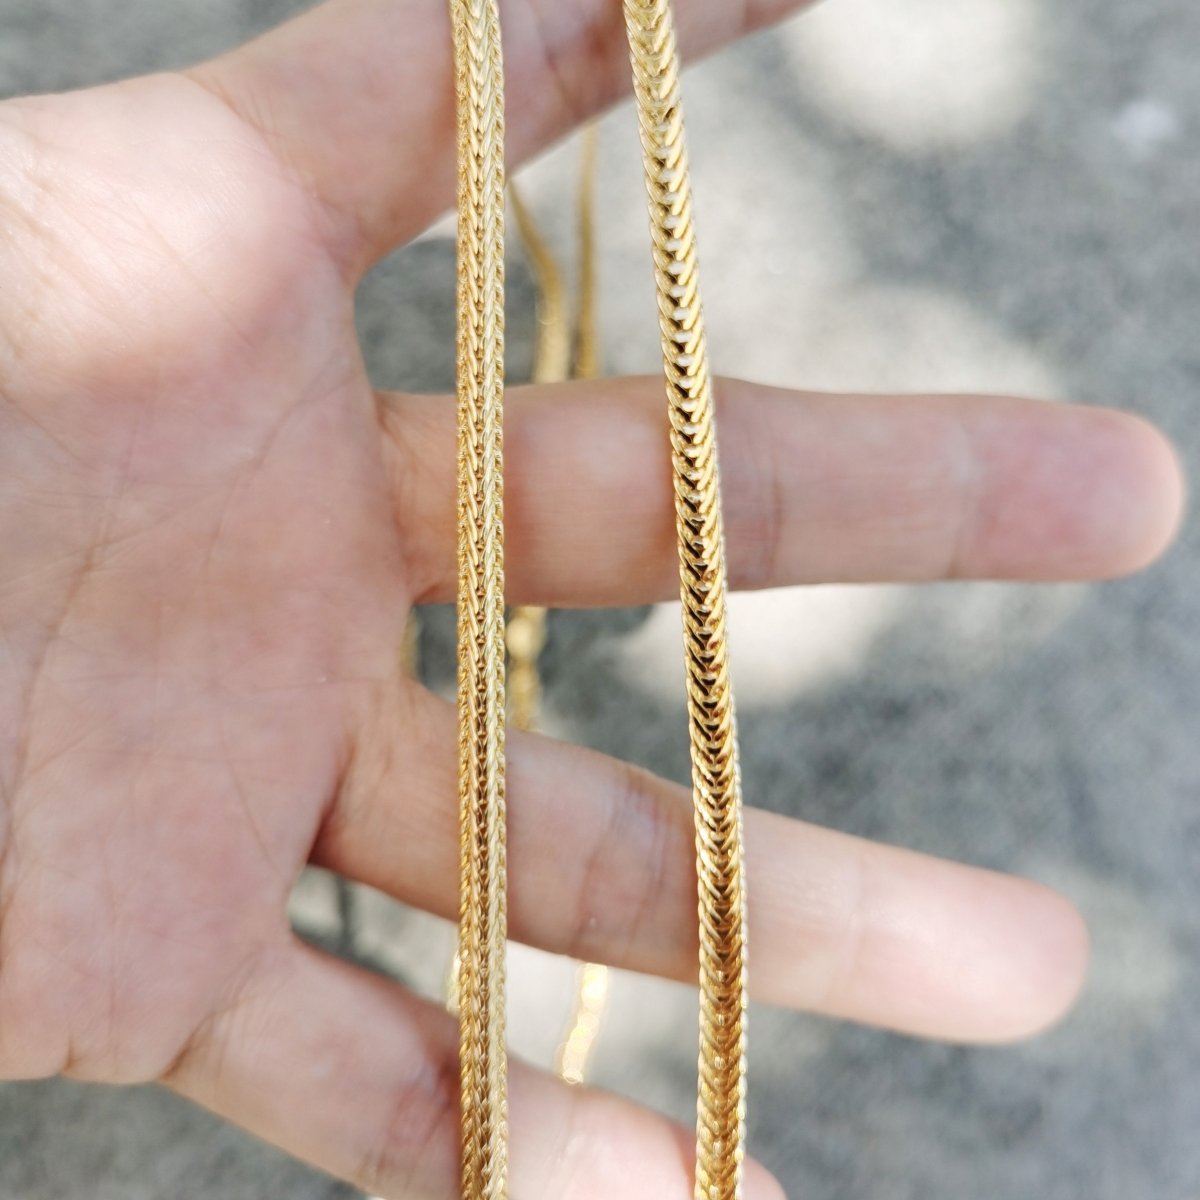 24K Gold Plated Herringbone Snake Star Weave Designed Necklace - 20 inches, 4mm Designed Necklace w/ Lobster Clasps | CN-753 Clearance Pricing - DLUXCA